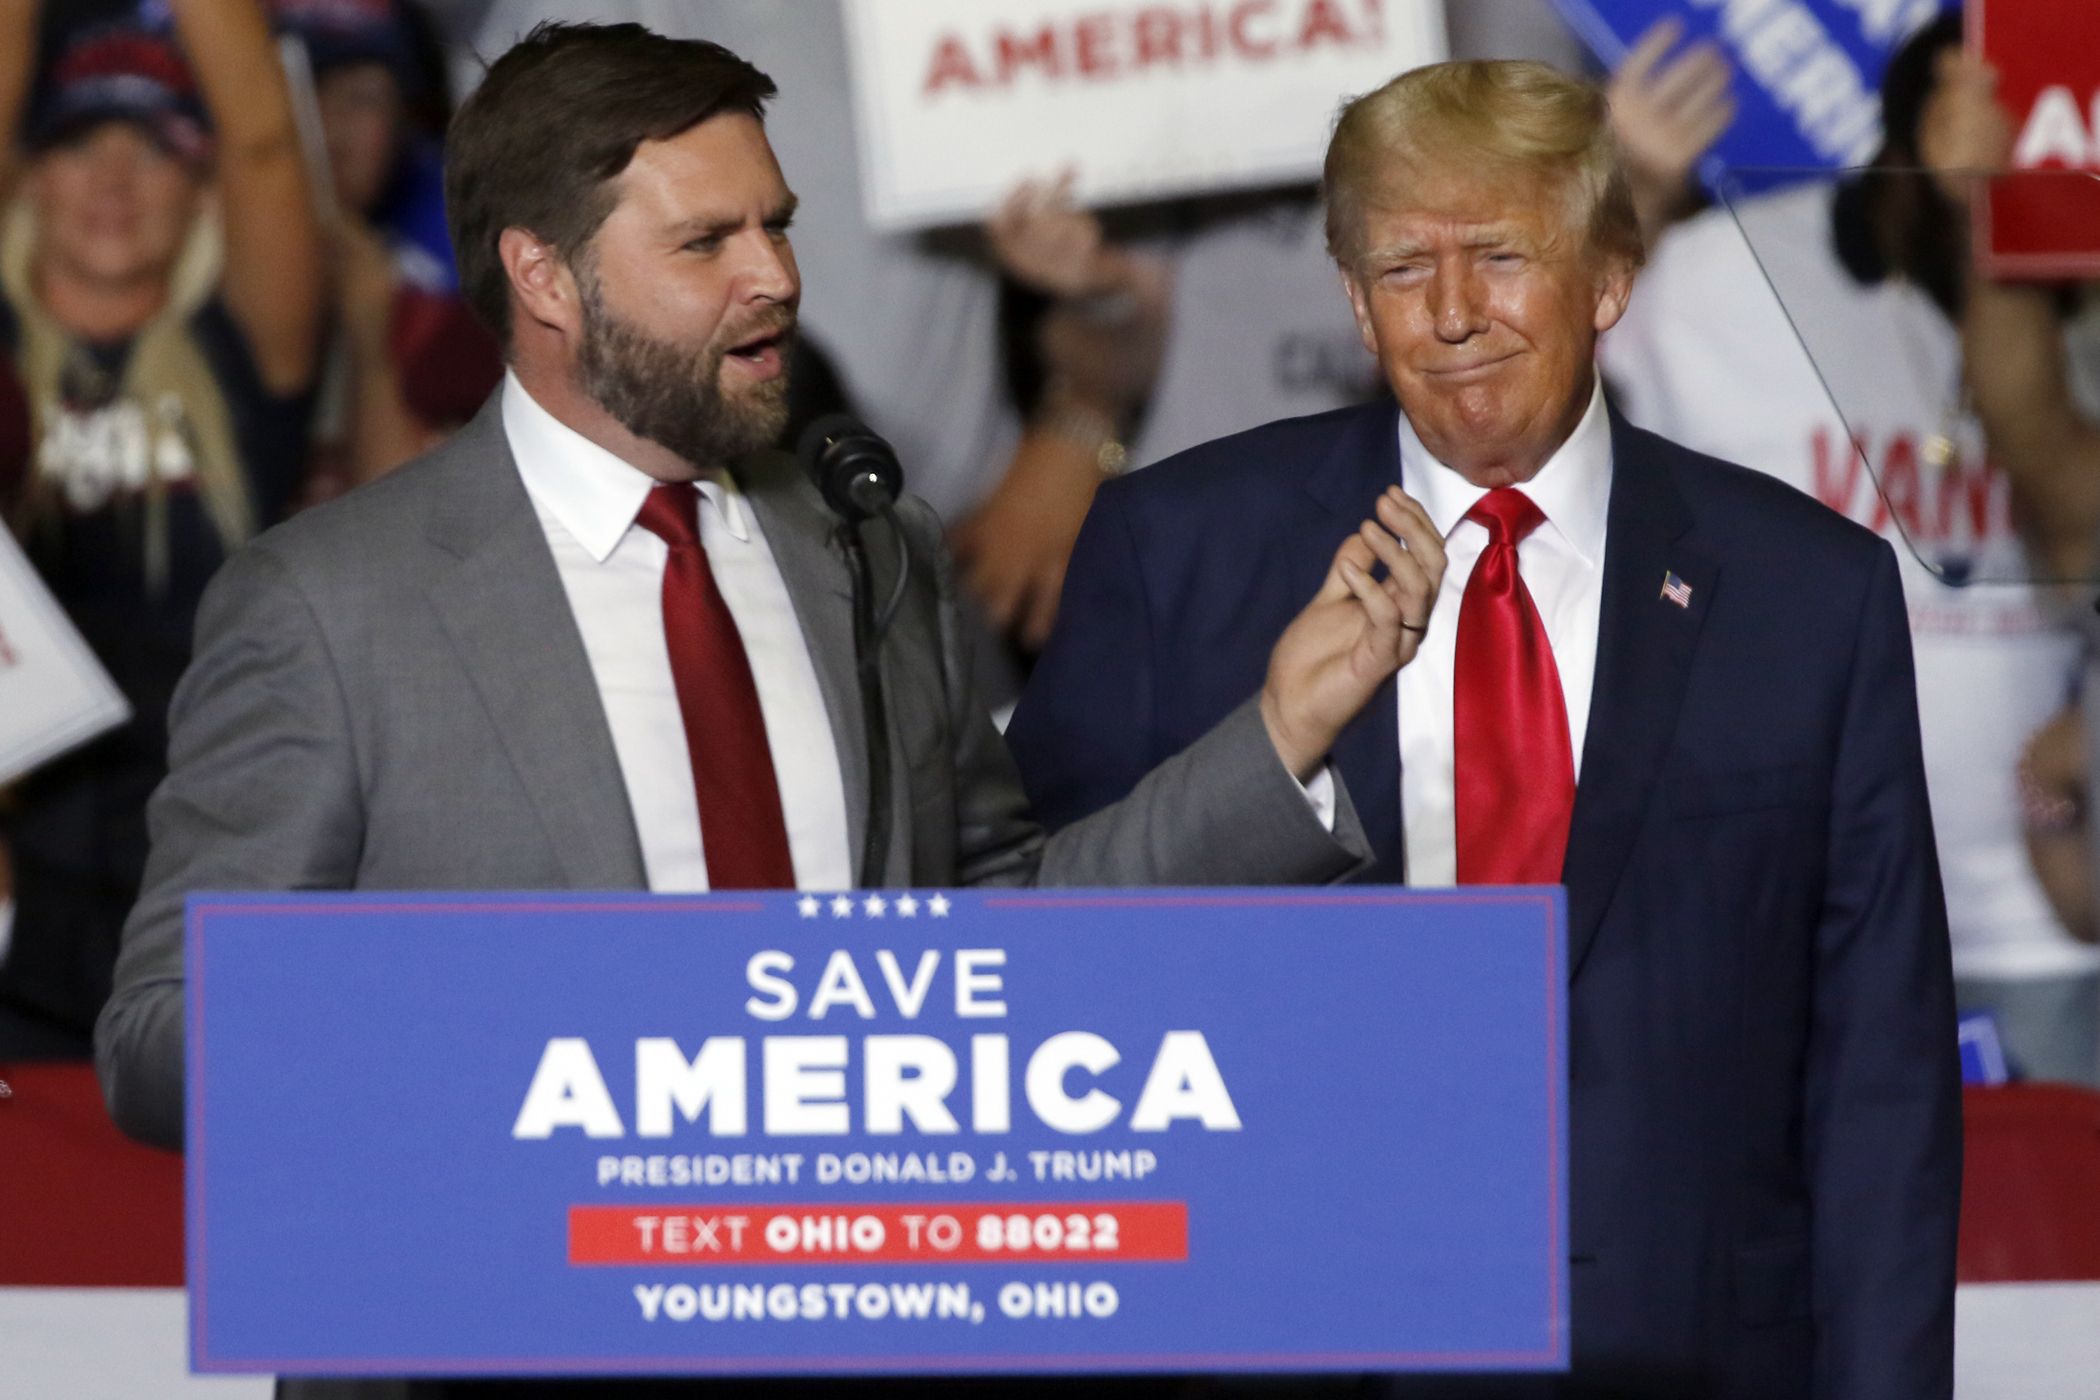 J.D. Vance and Donald Trump stand behind a podium that says 